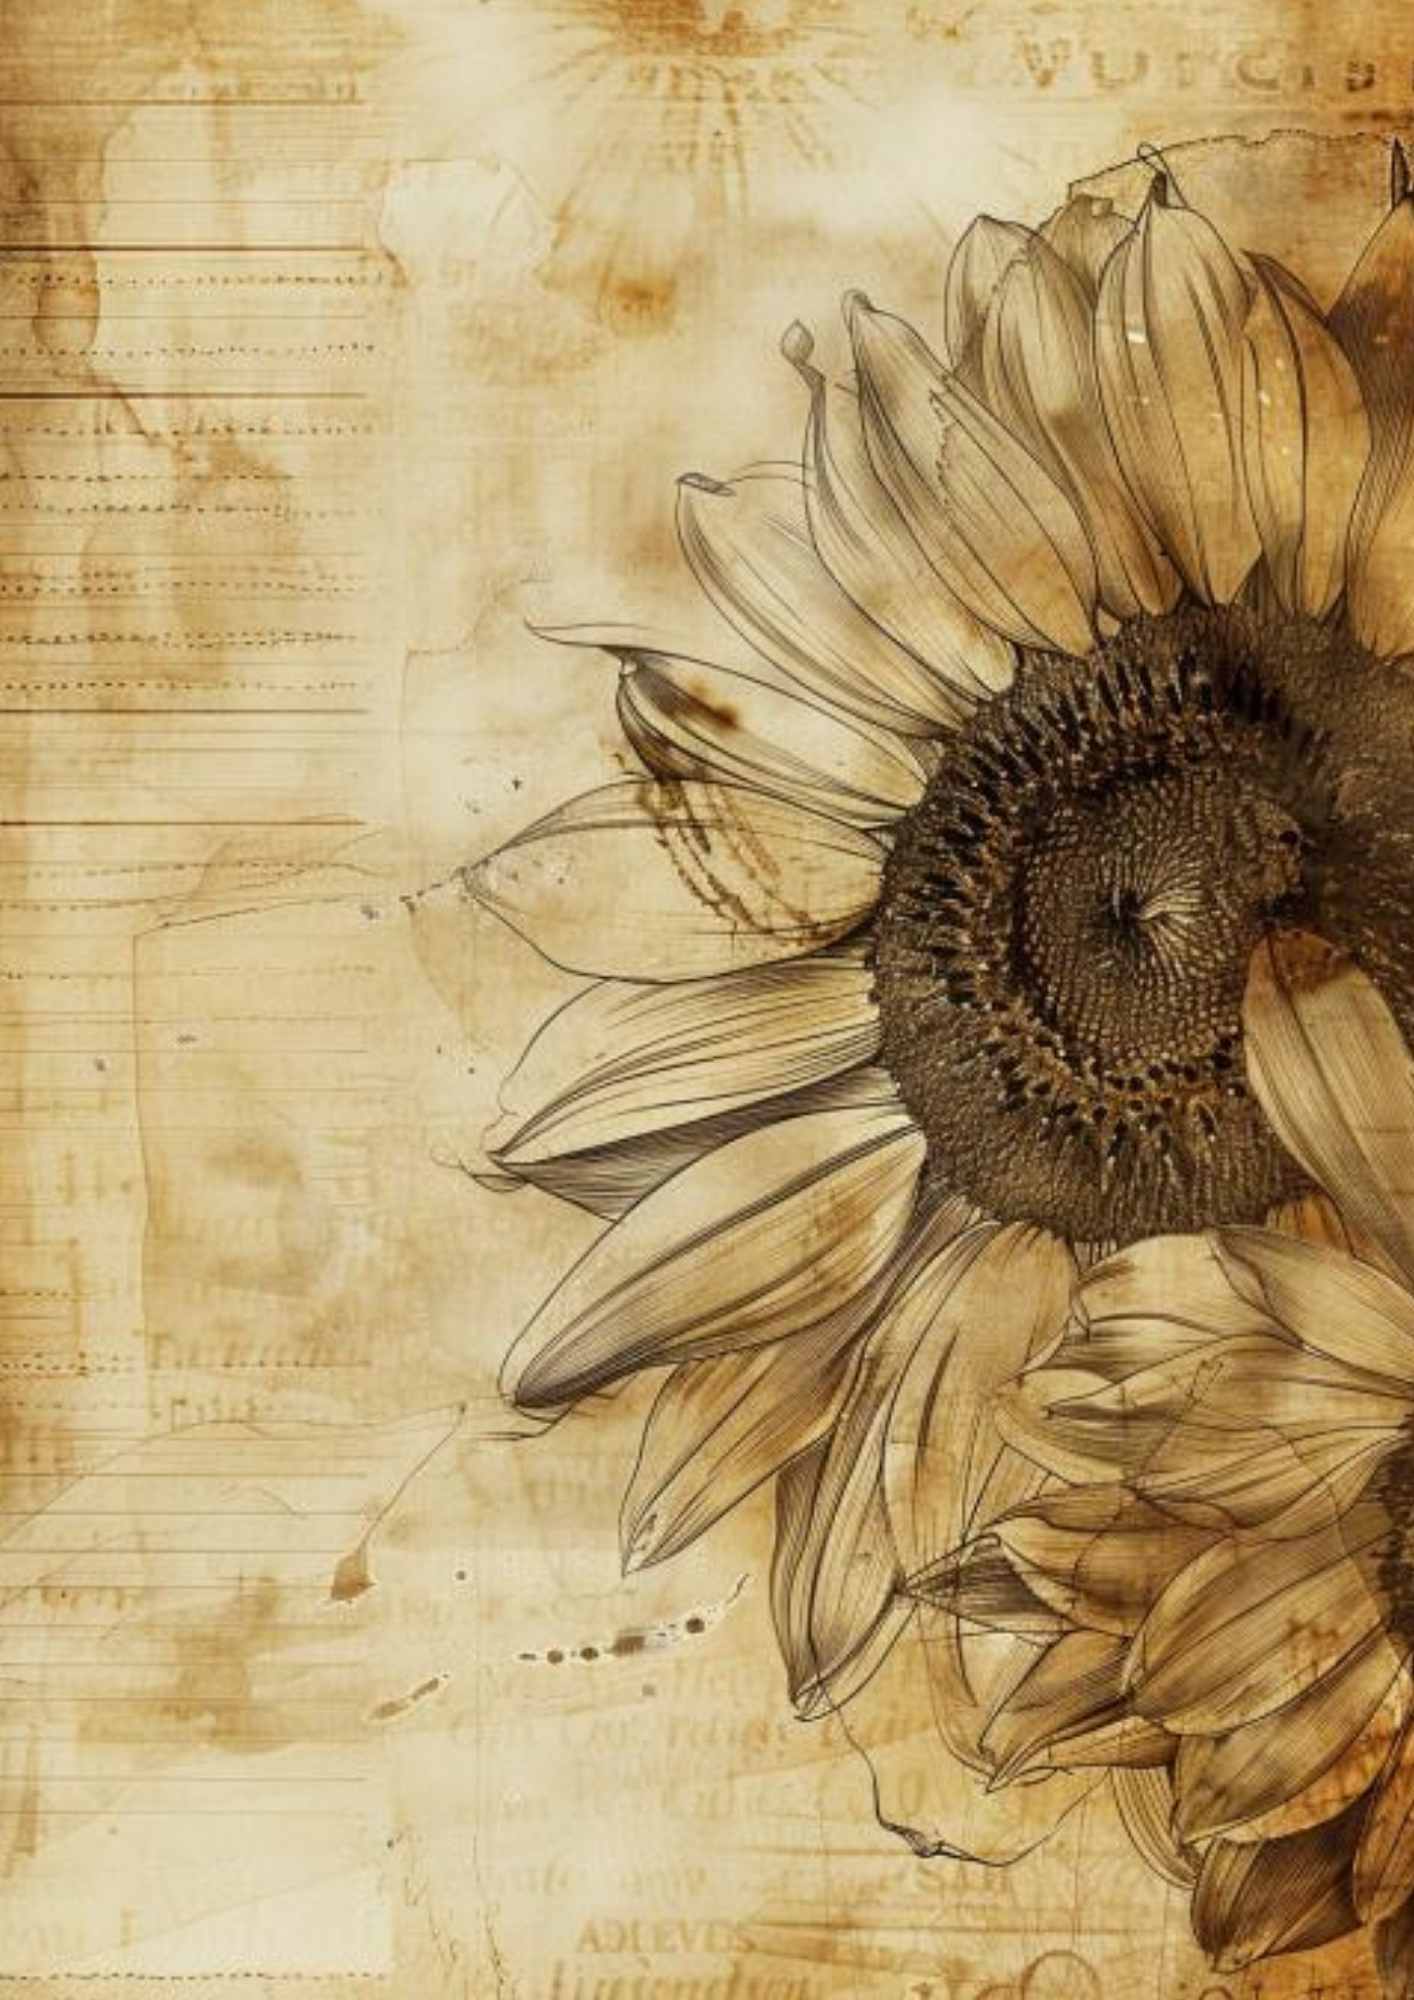 80+ Sunflower Junk Journal Pages (Free Printables for Your Crafting ...